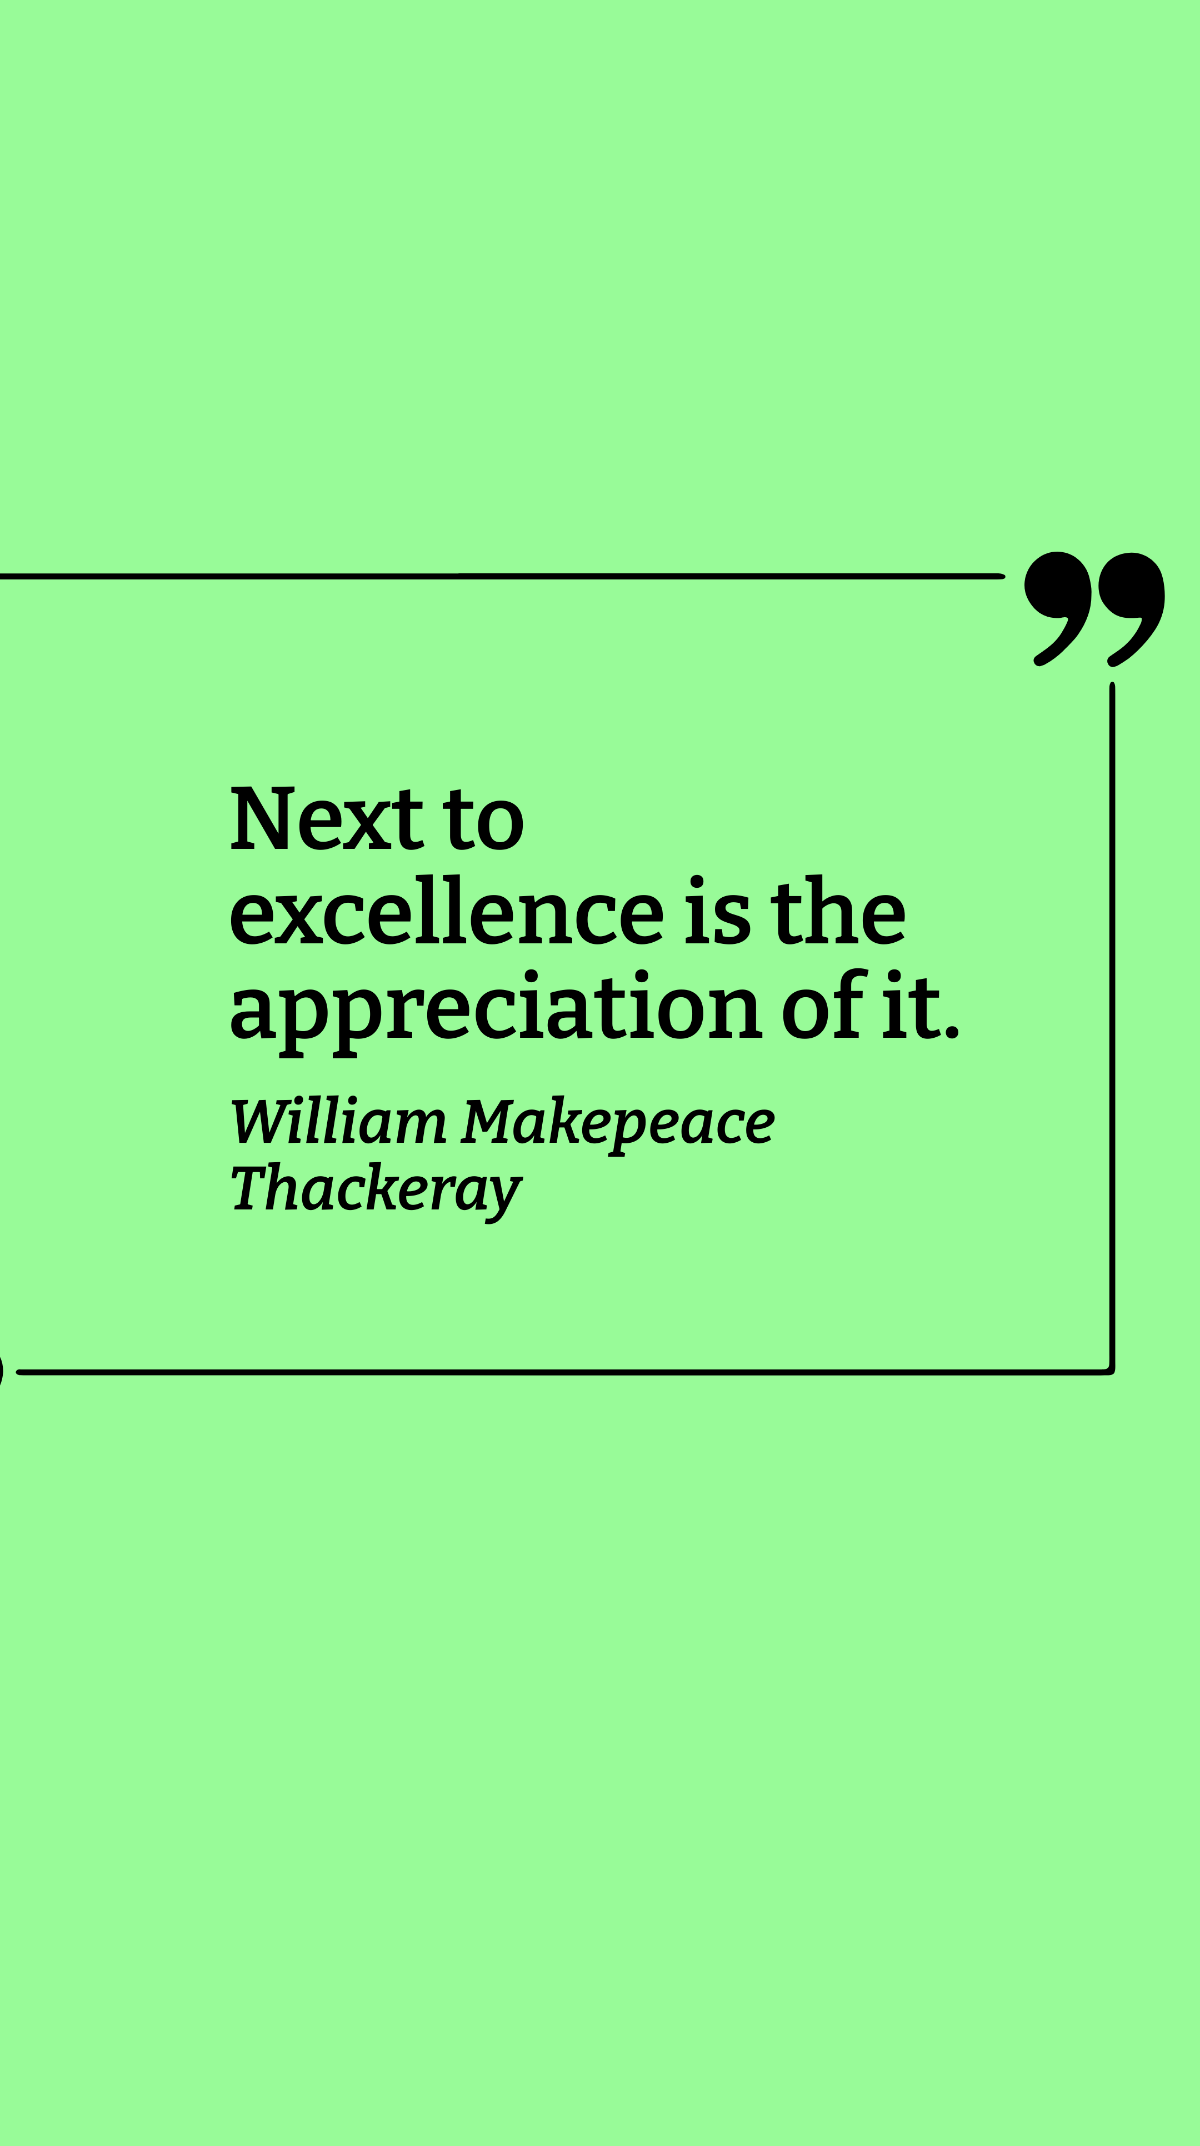 William Makepeace Thackeray - Next to excellence is the appreciation of it. Template